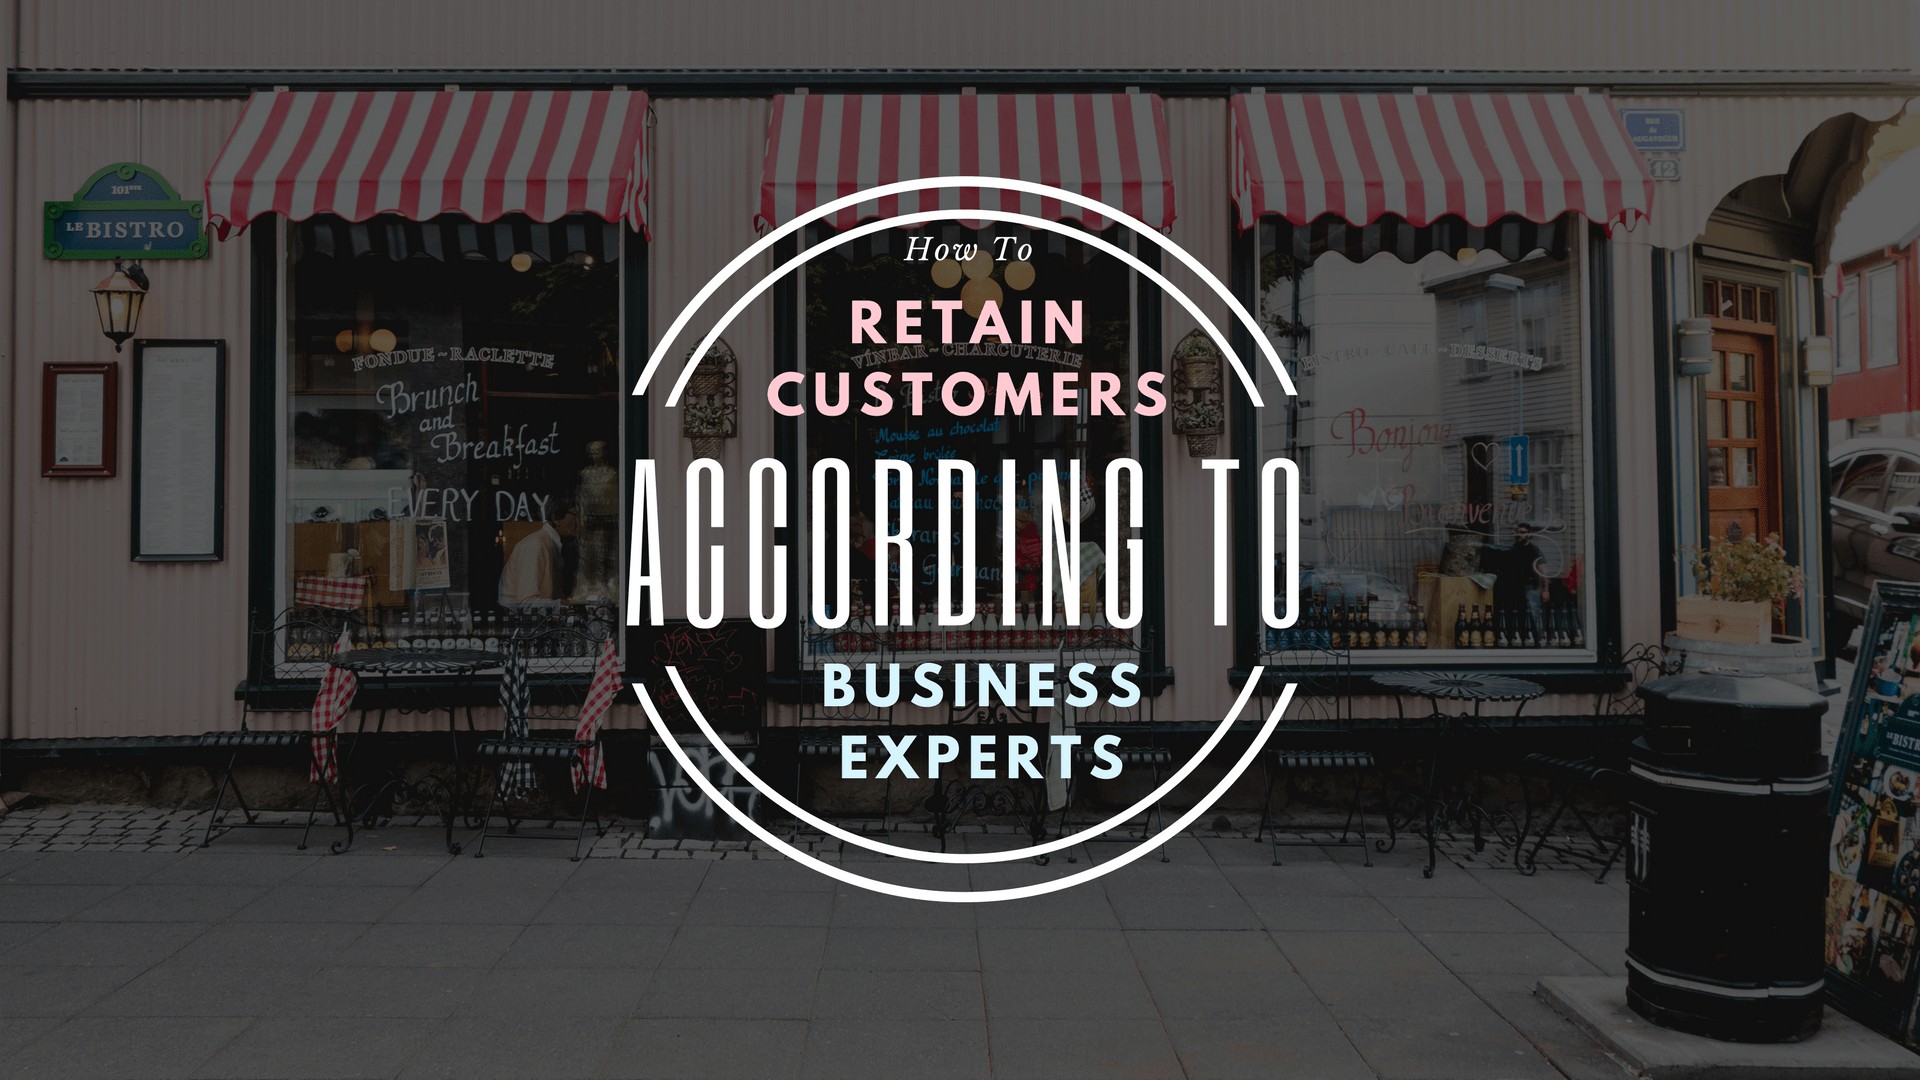 How to Retain Customers According to Business Experts